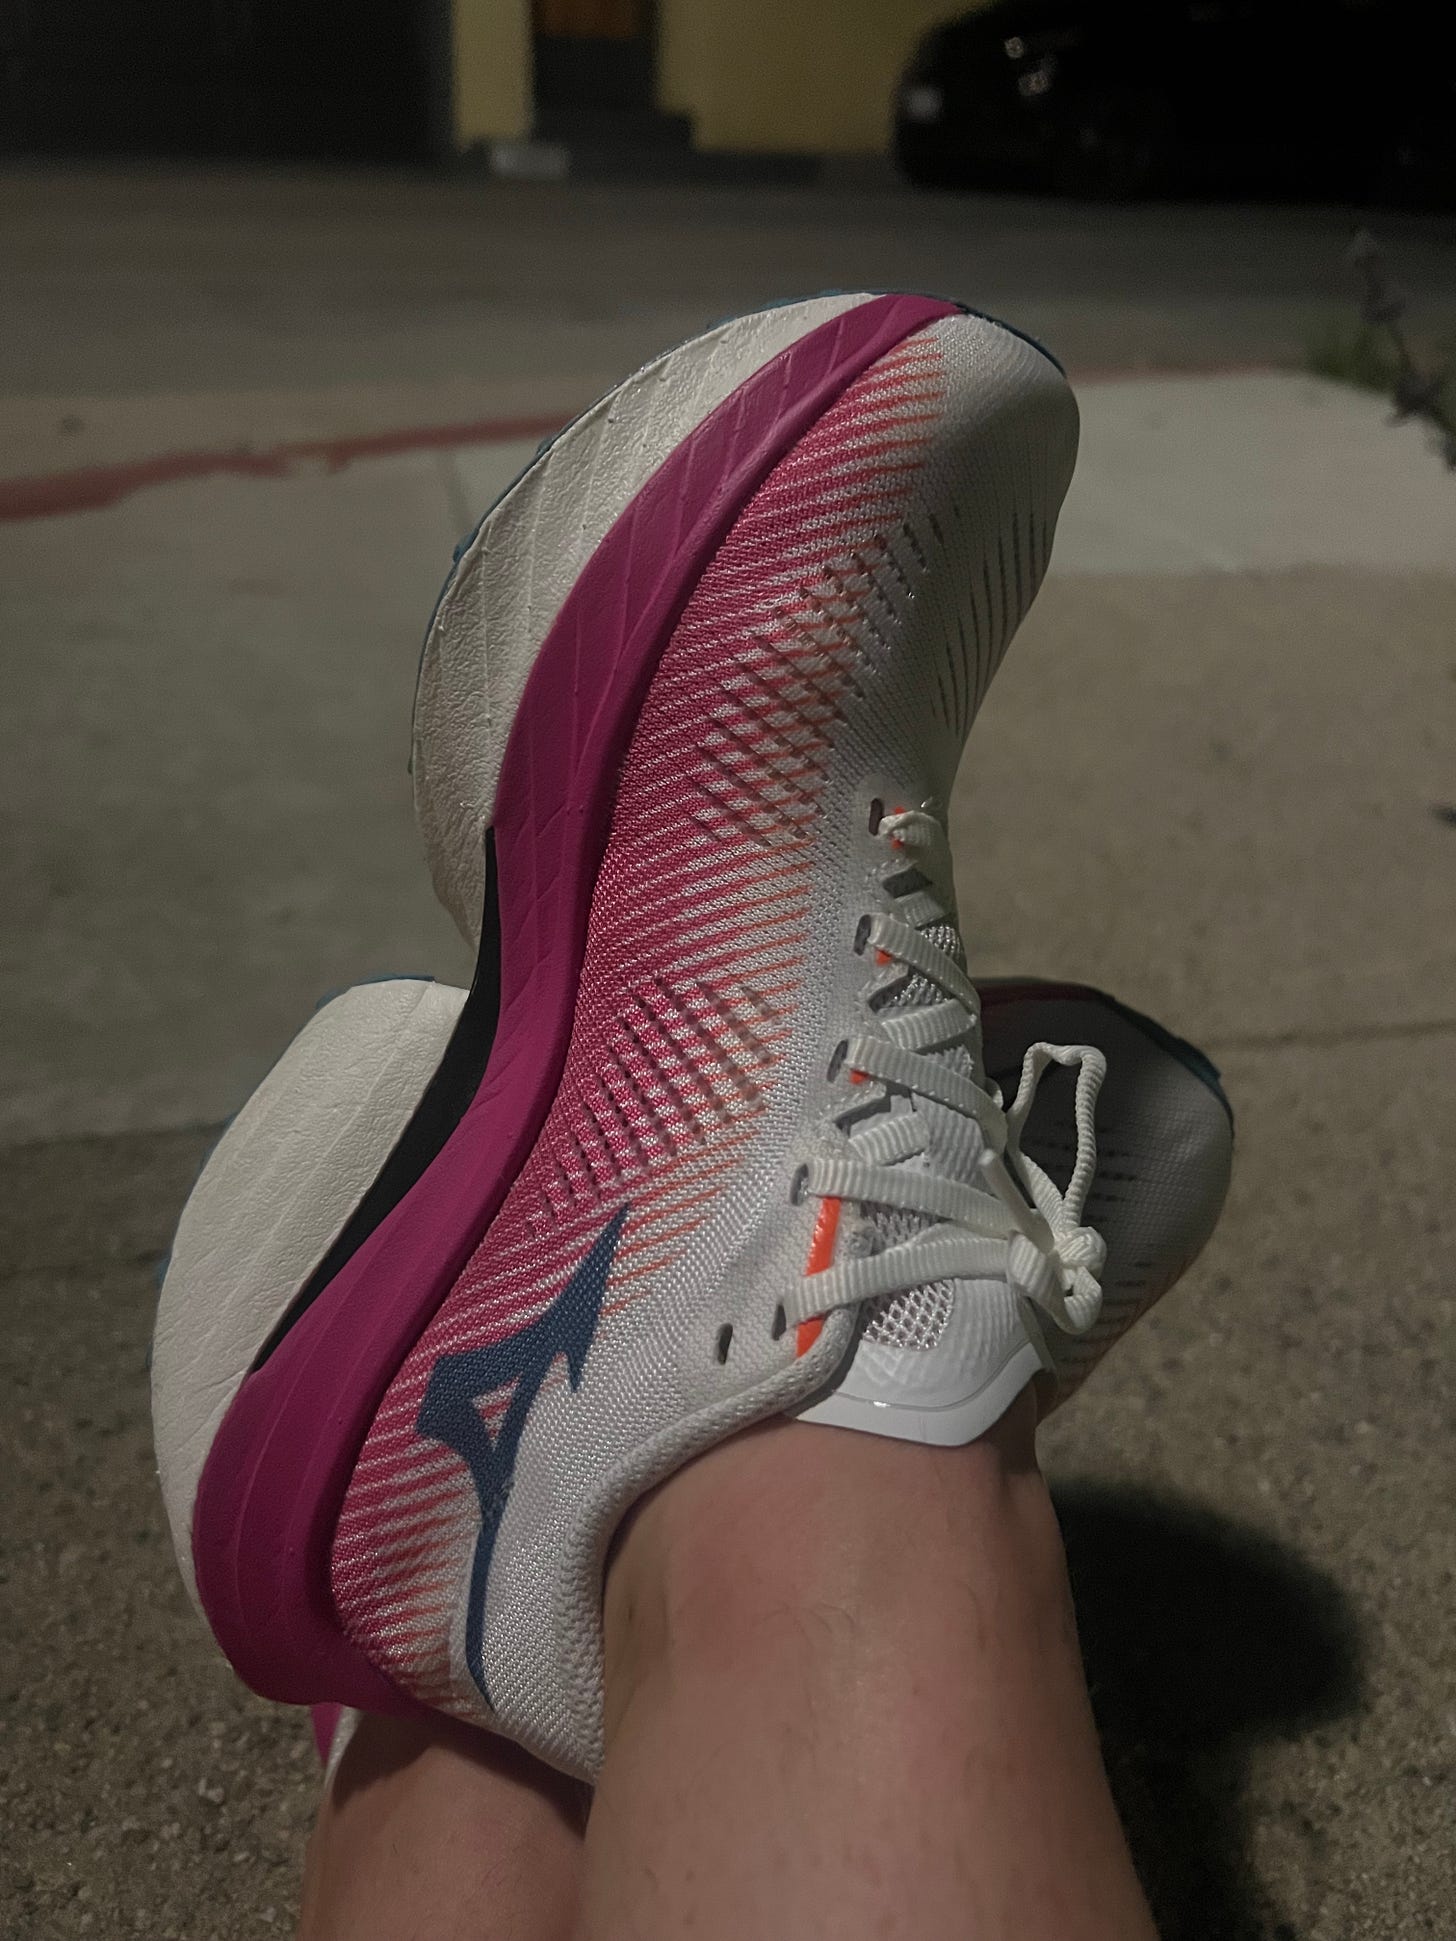 A side shot of running shoes